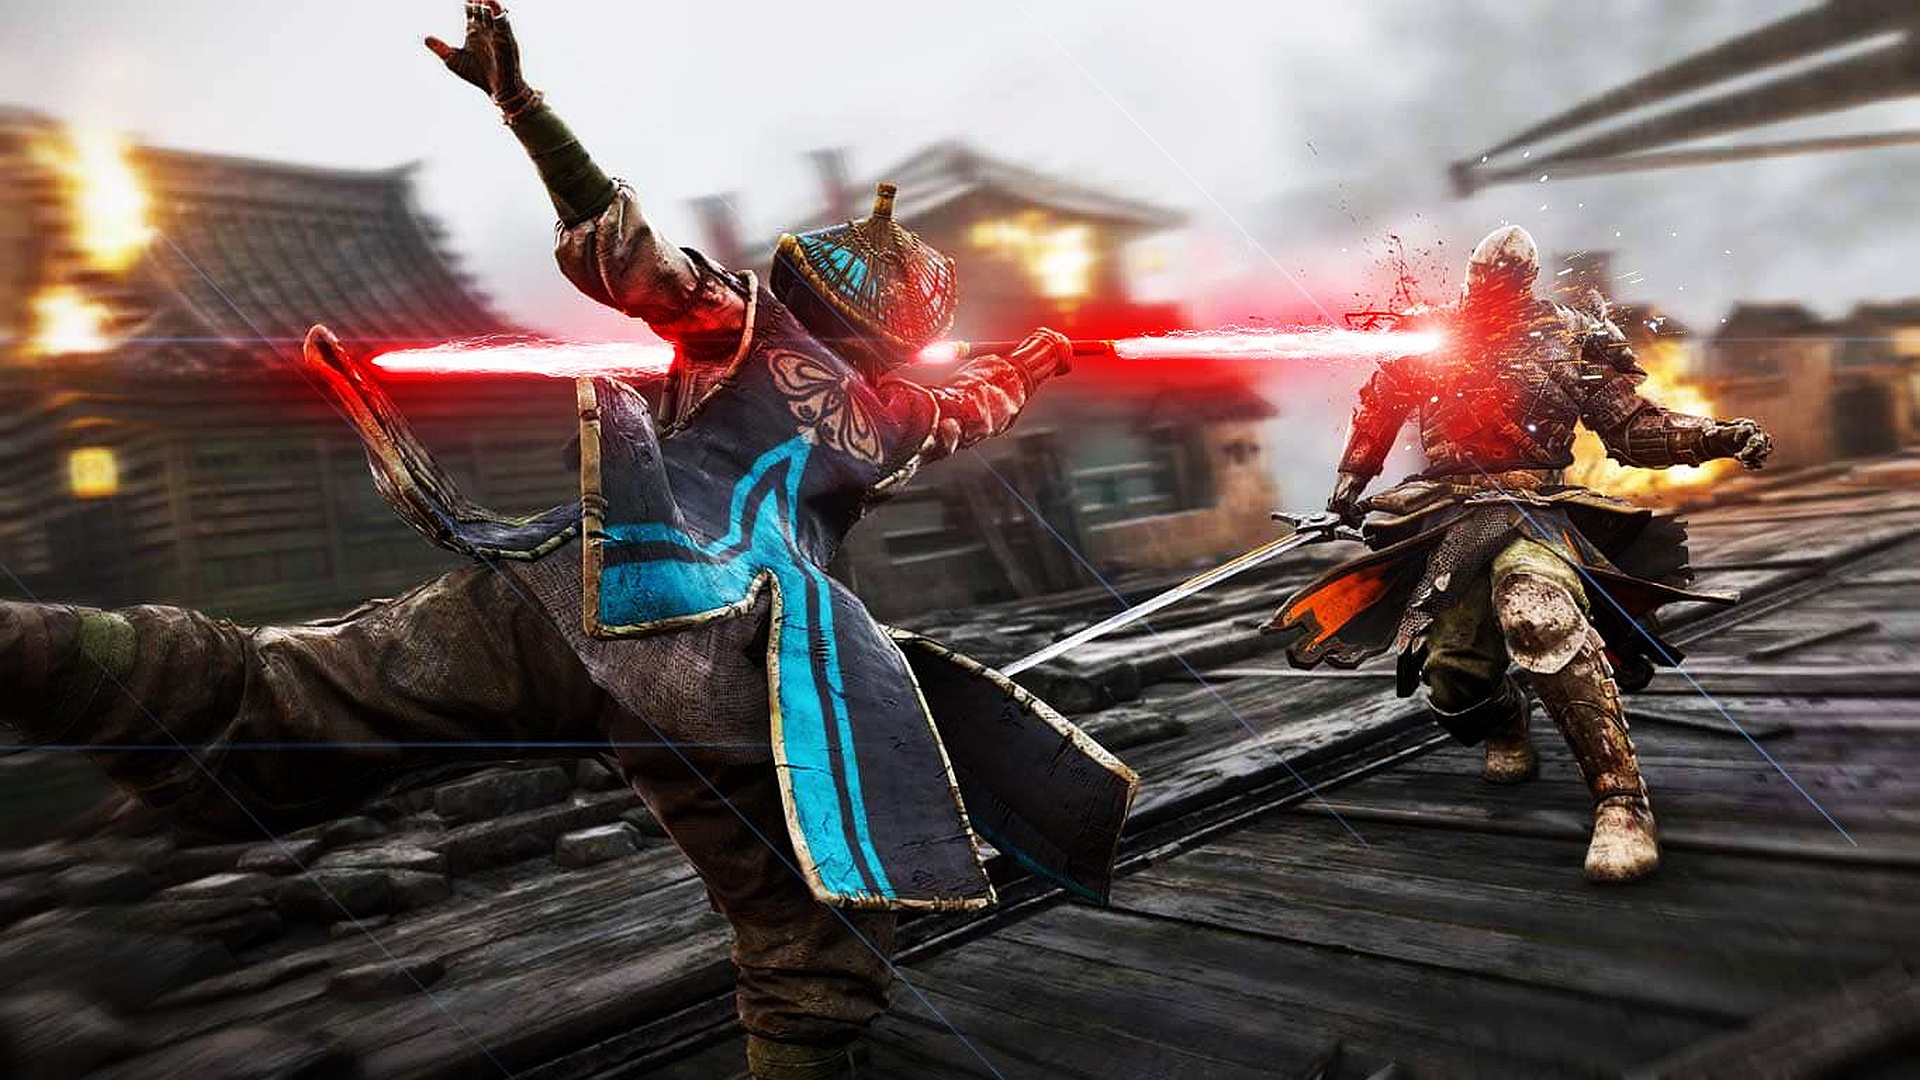 For Honor Looks Even Cooler With These Lightsaber Like Effects; Fans